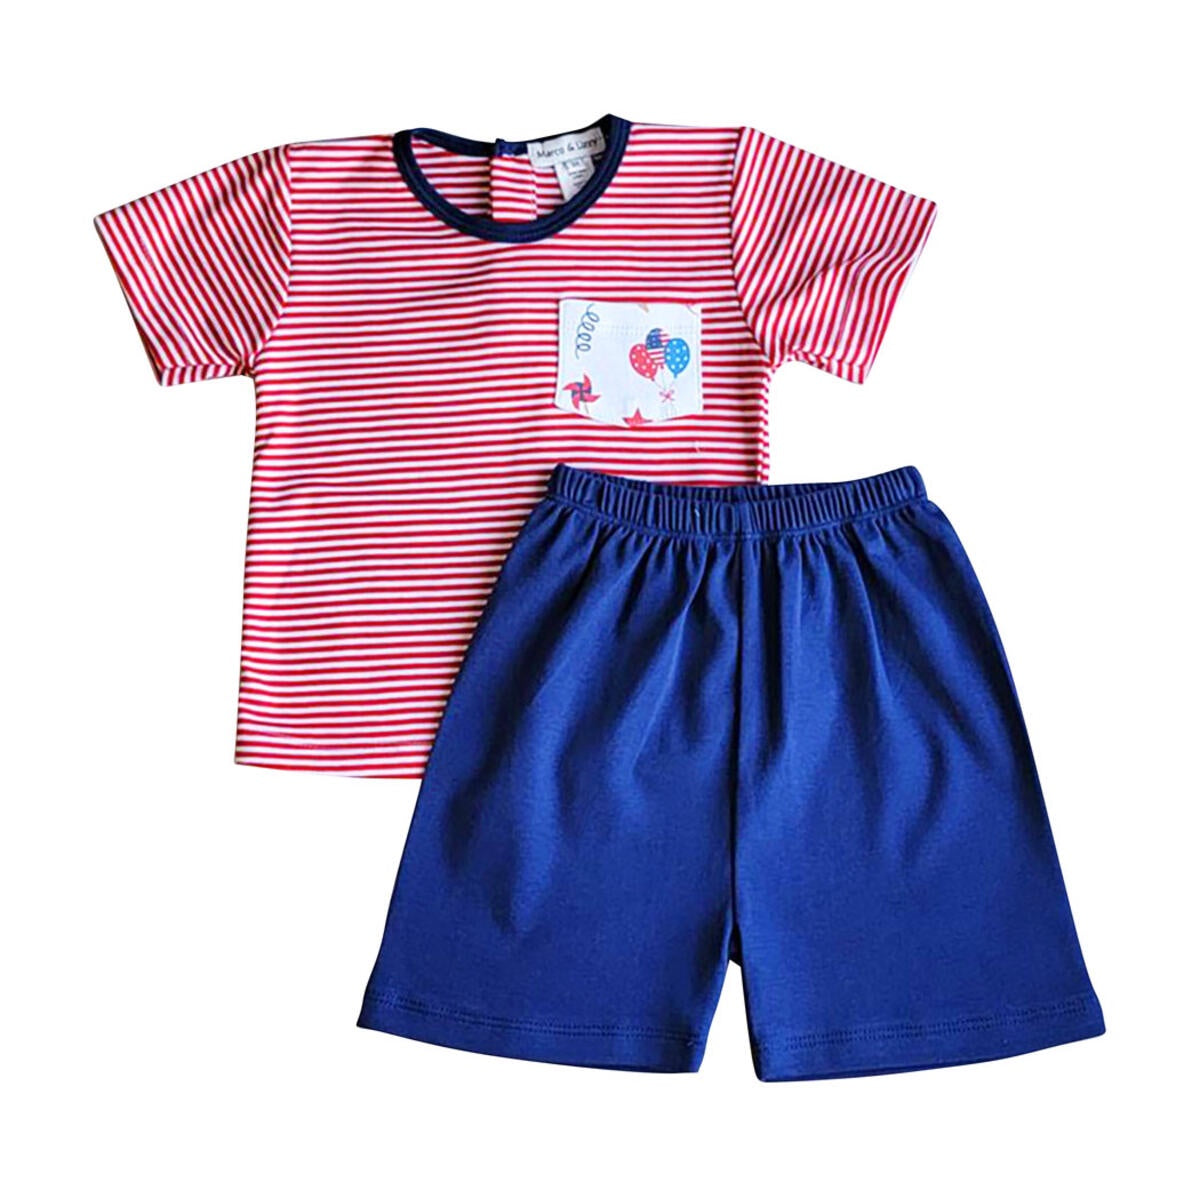 Marco & Lizzy 4th of July Print Shirt and Short Set IF0013S3 5104